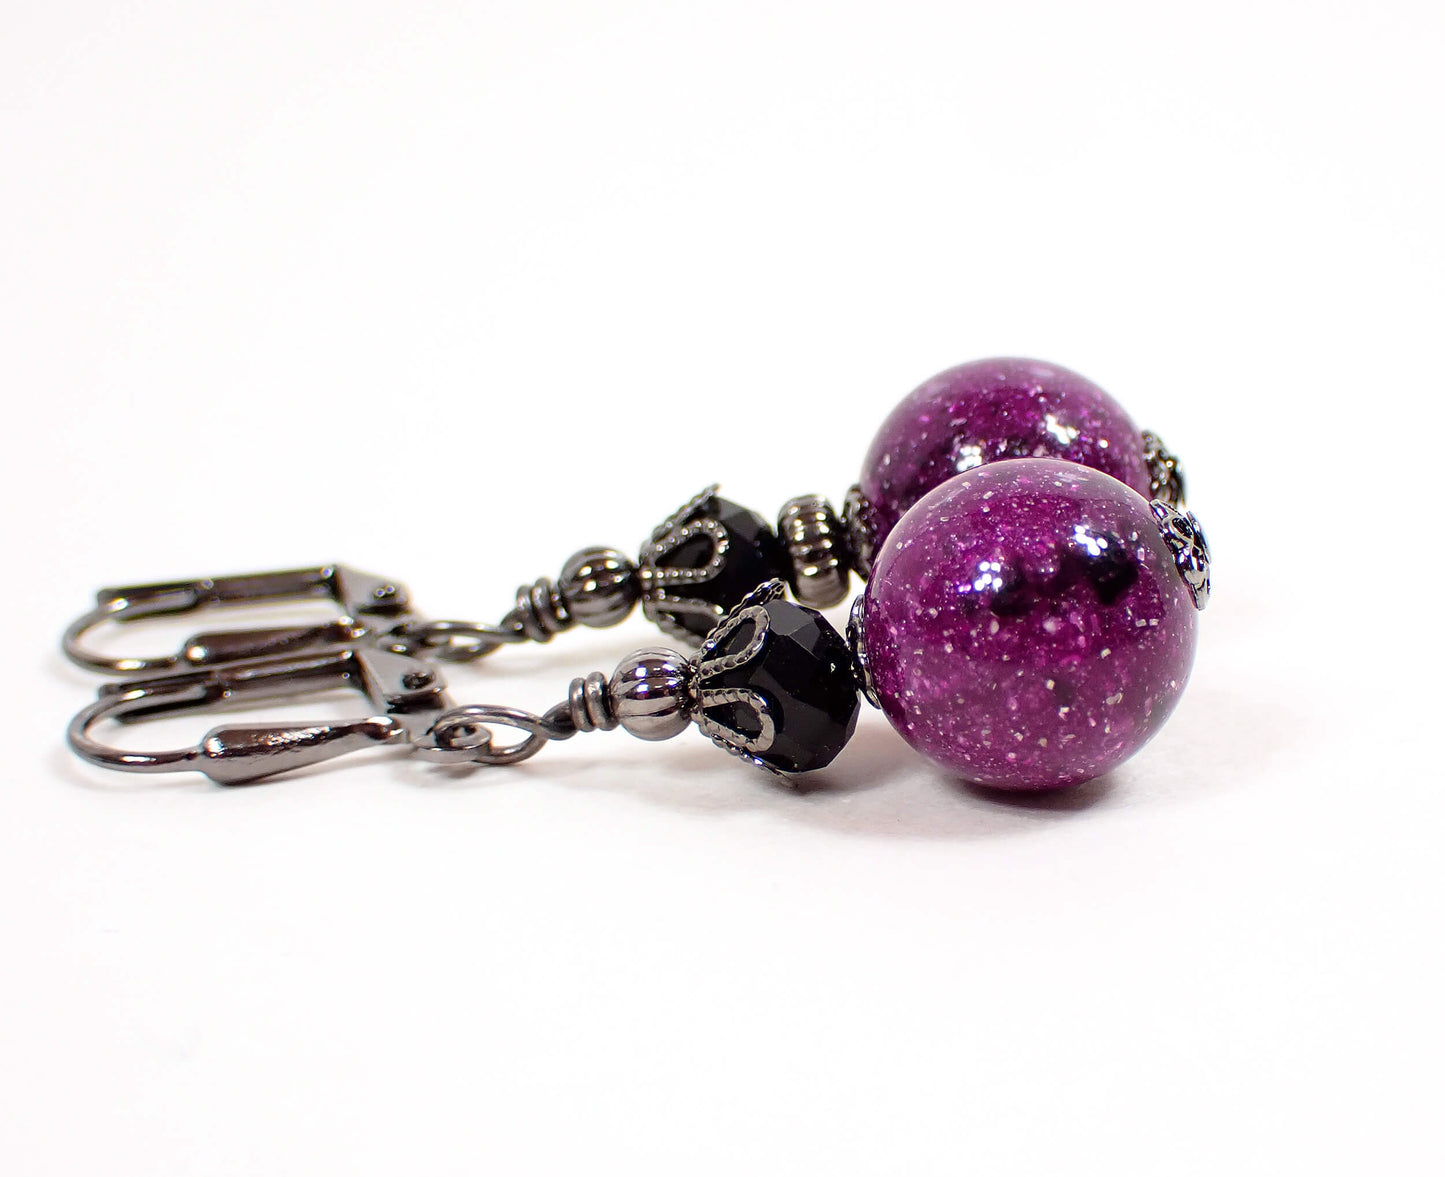 Handmade Sparkly Purple Lucite and Black Galaxy Earrings Gunmetal Hook Lever Back or Clip On